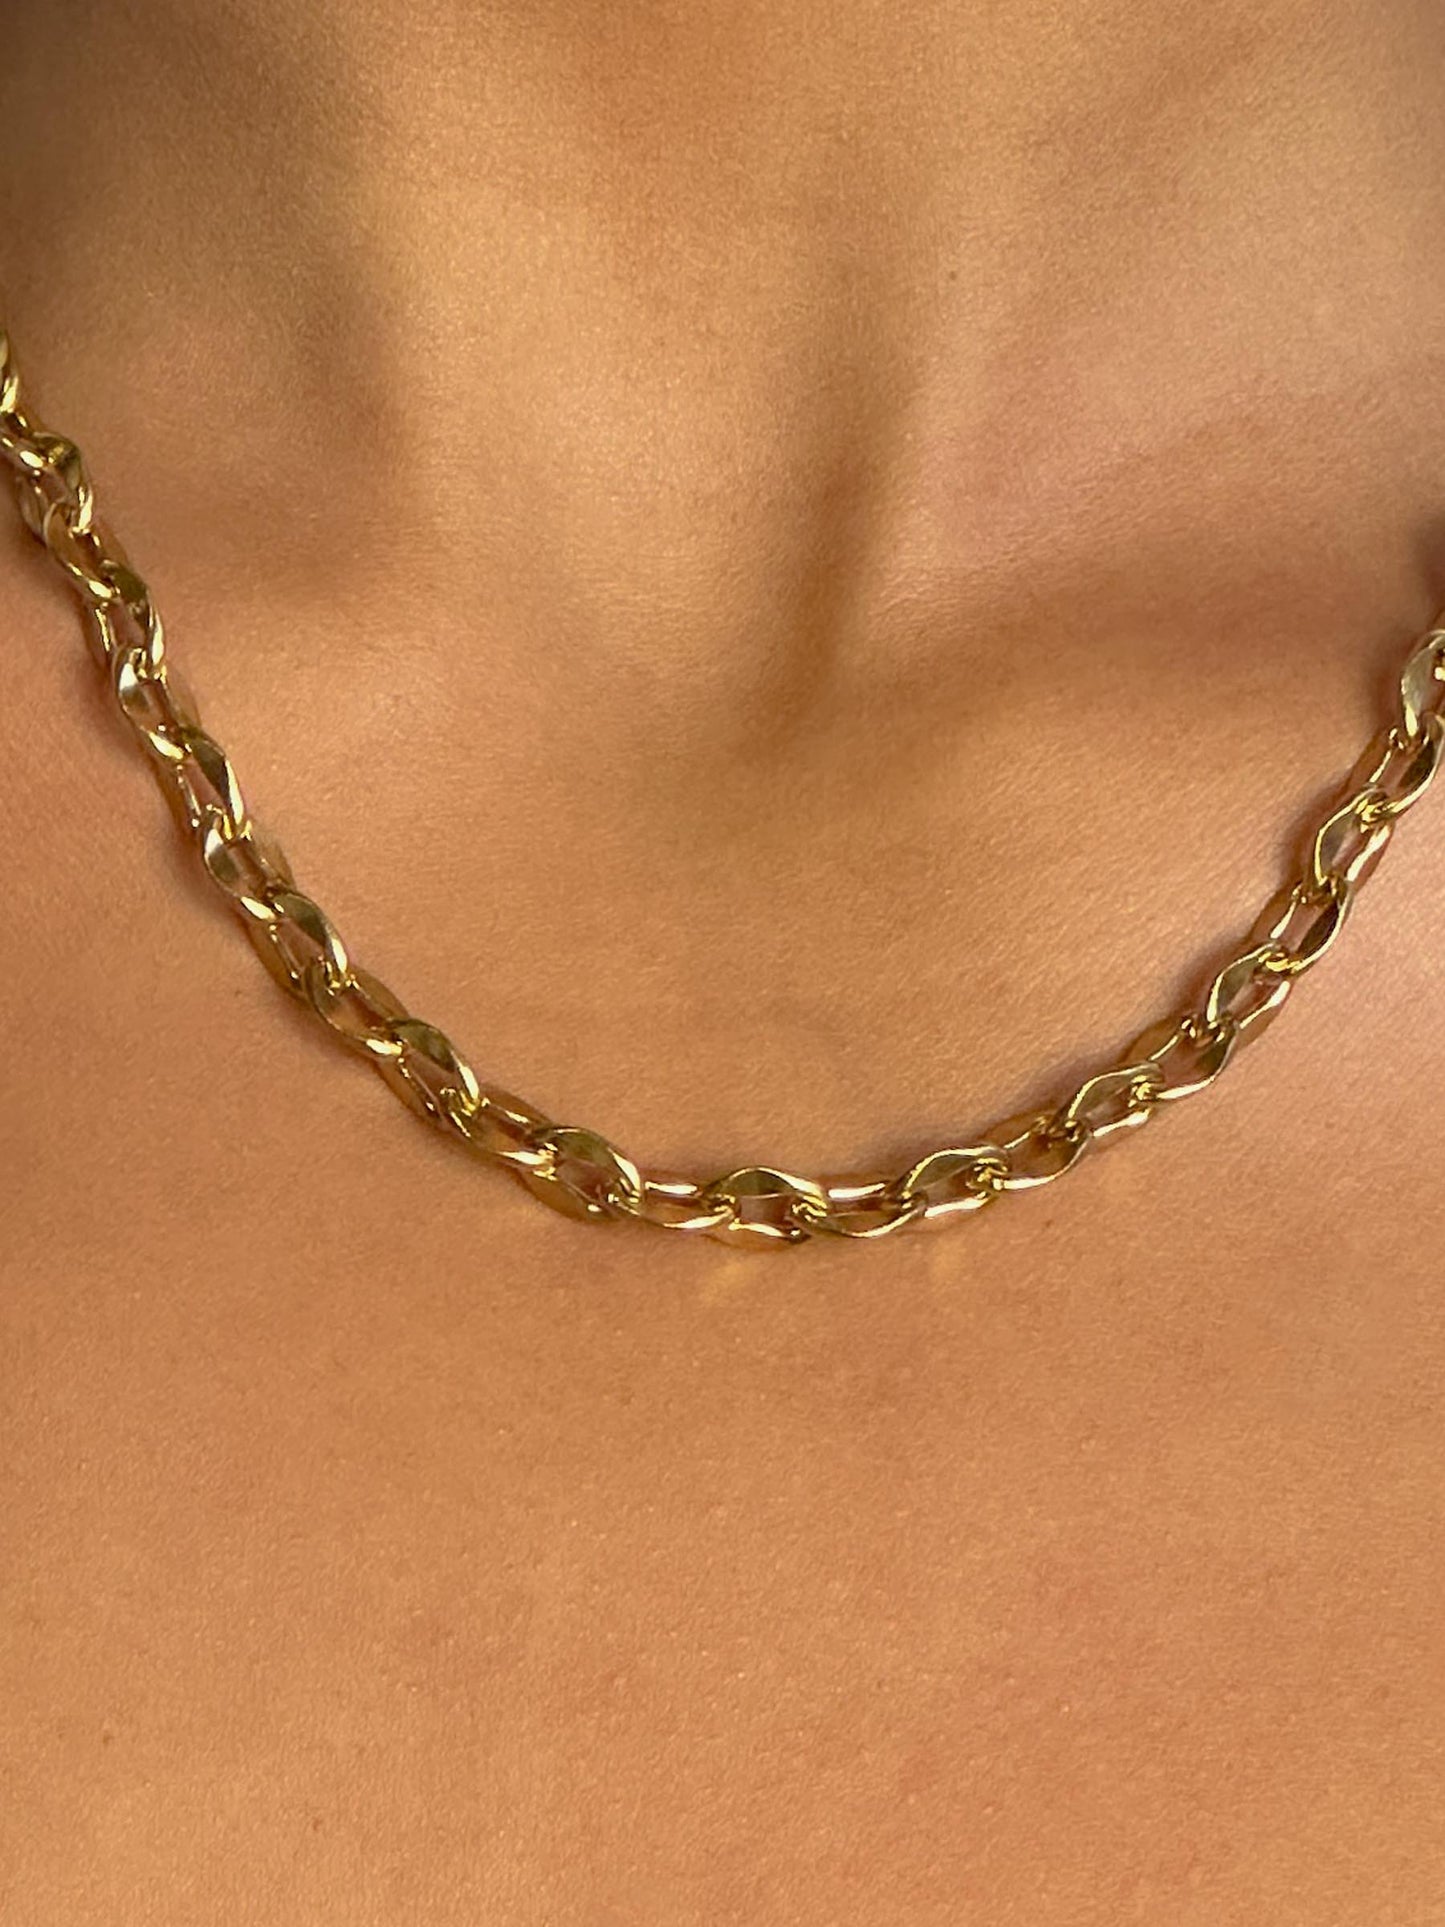 Uxe gold chain